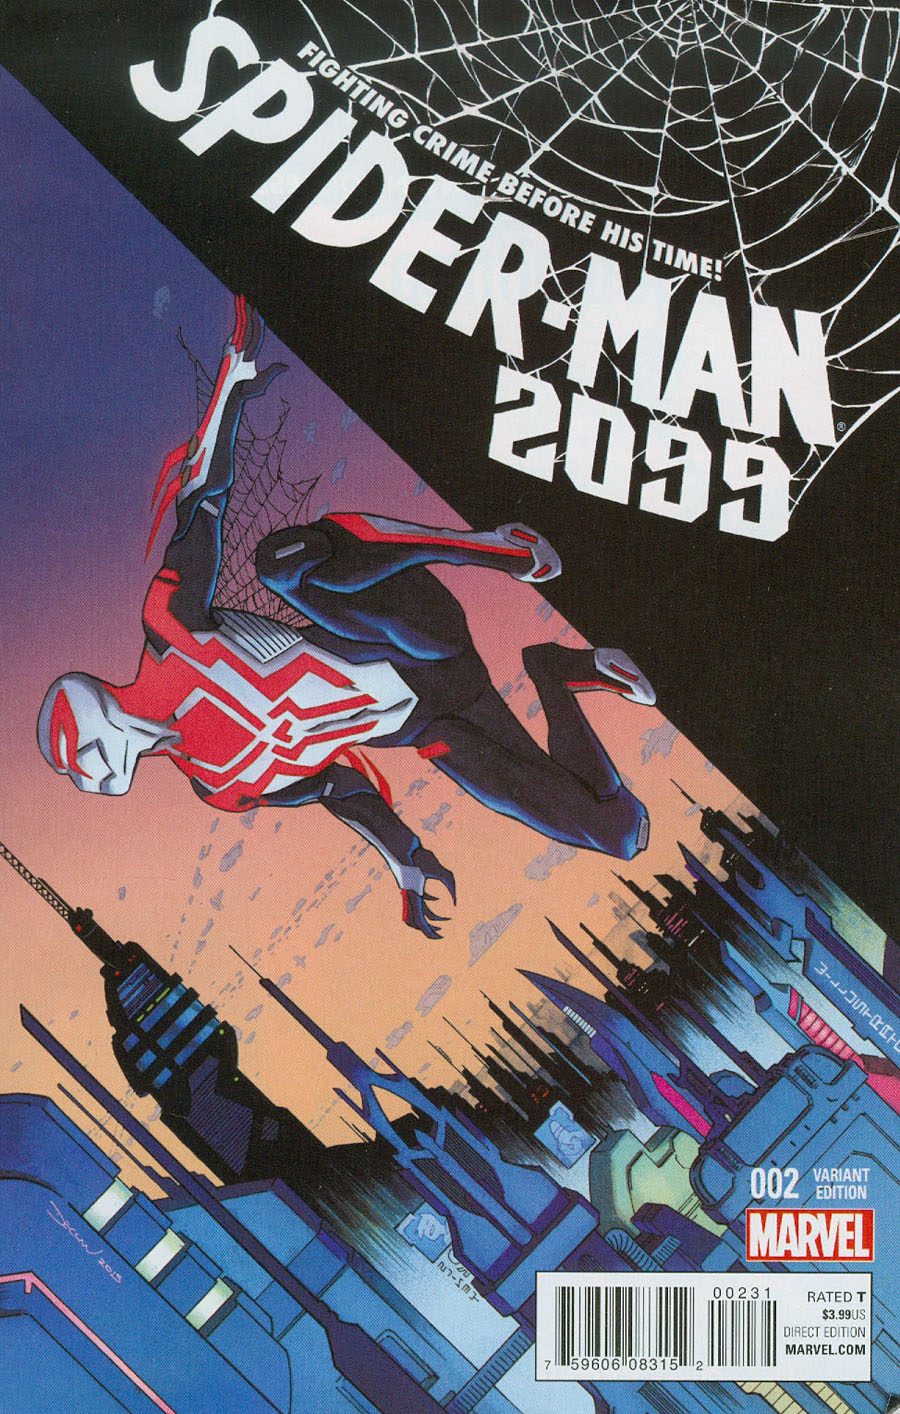 Spider-Man 2099 Vol 3 #2 Cover C Incentive Variant Cover